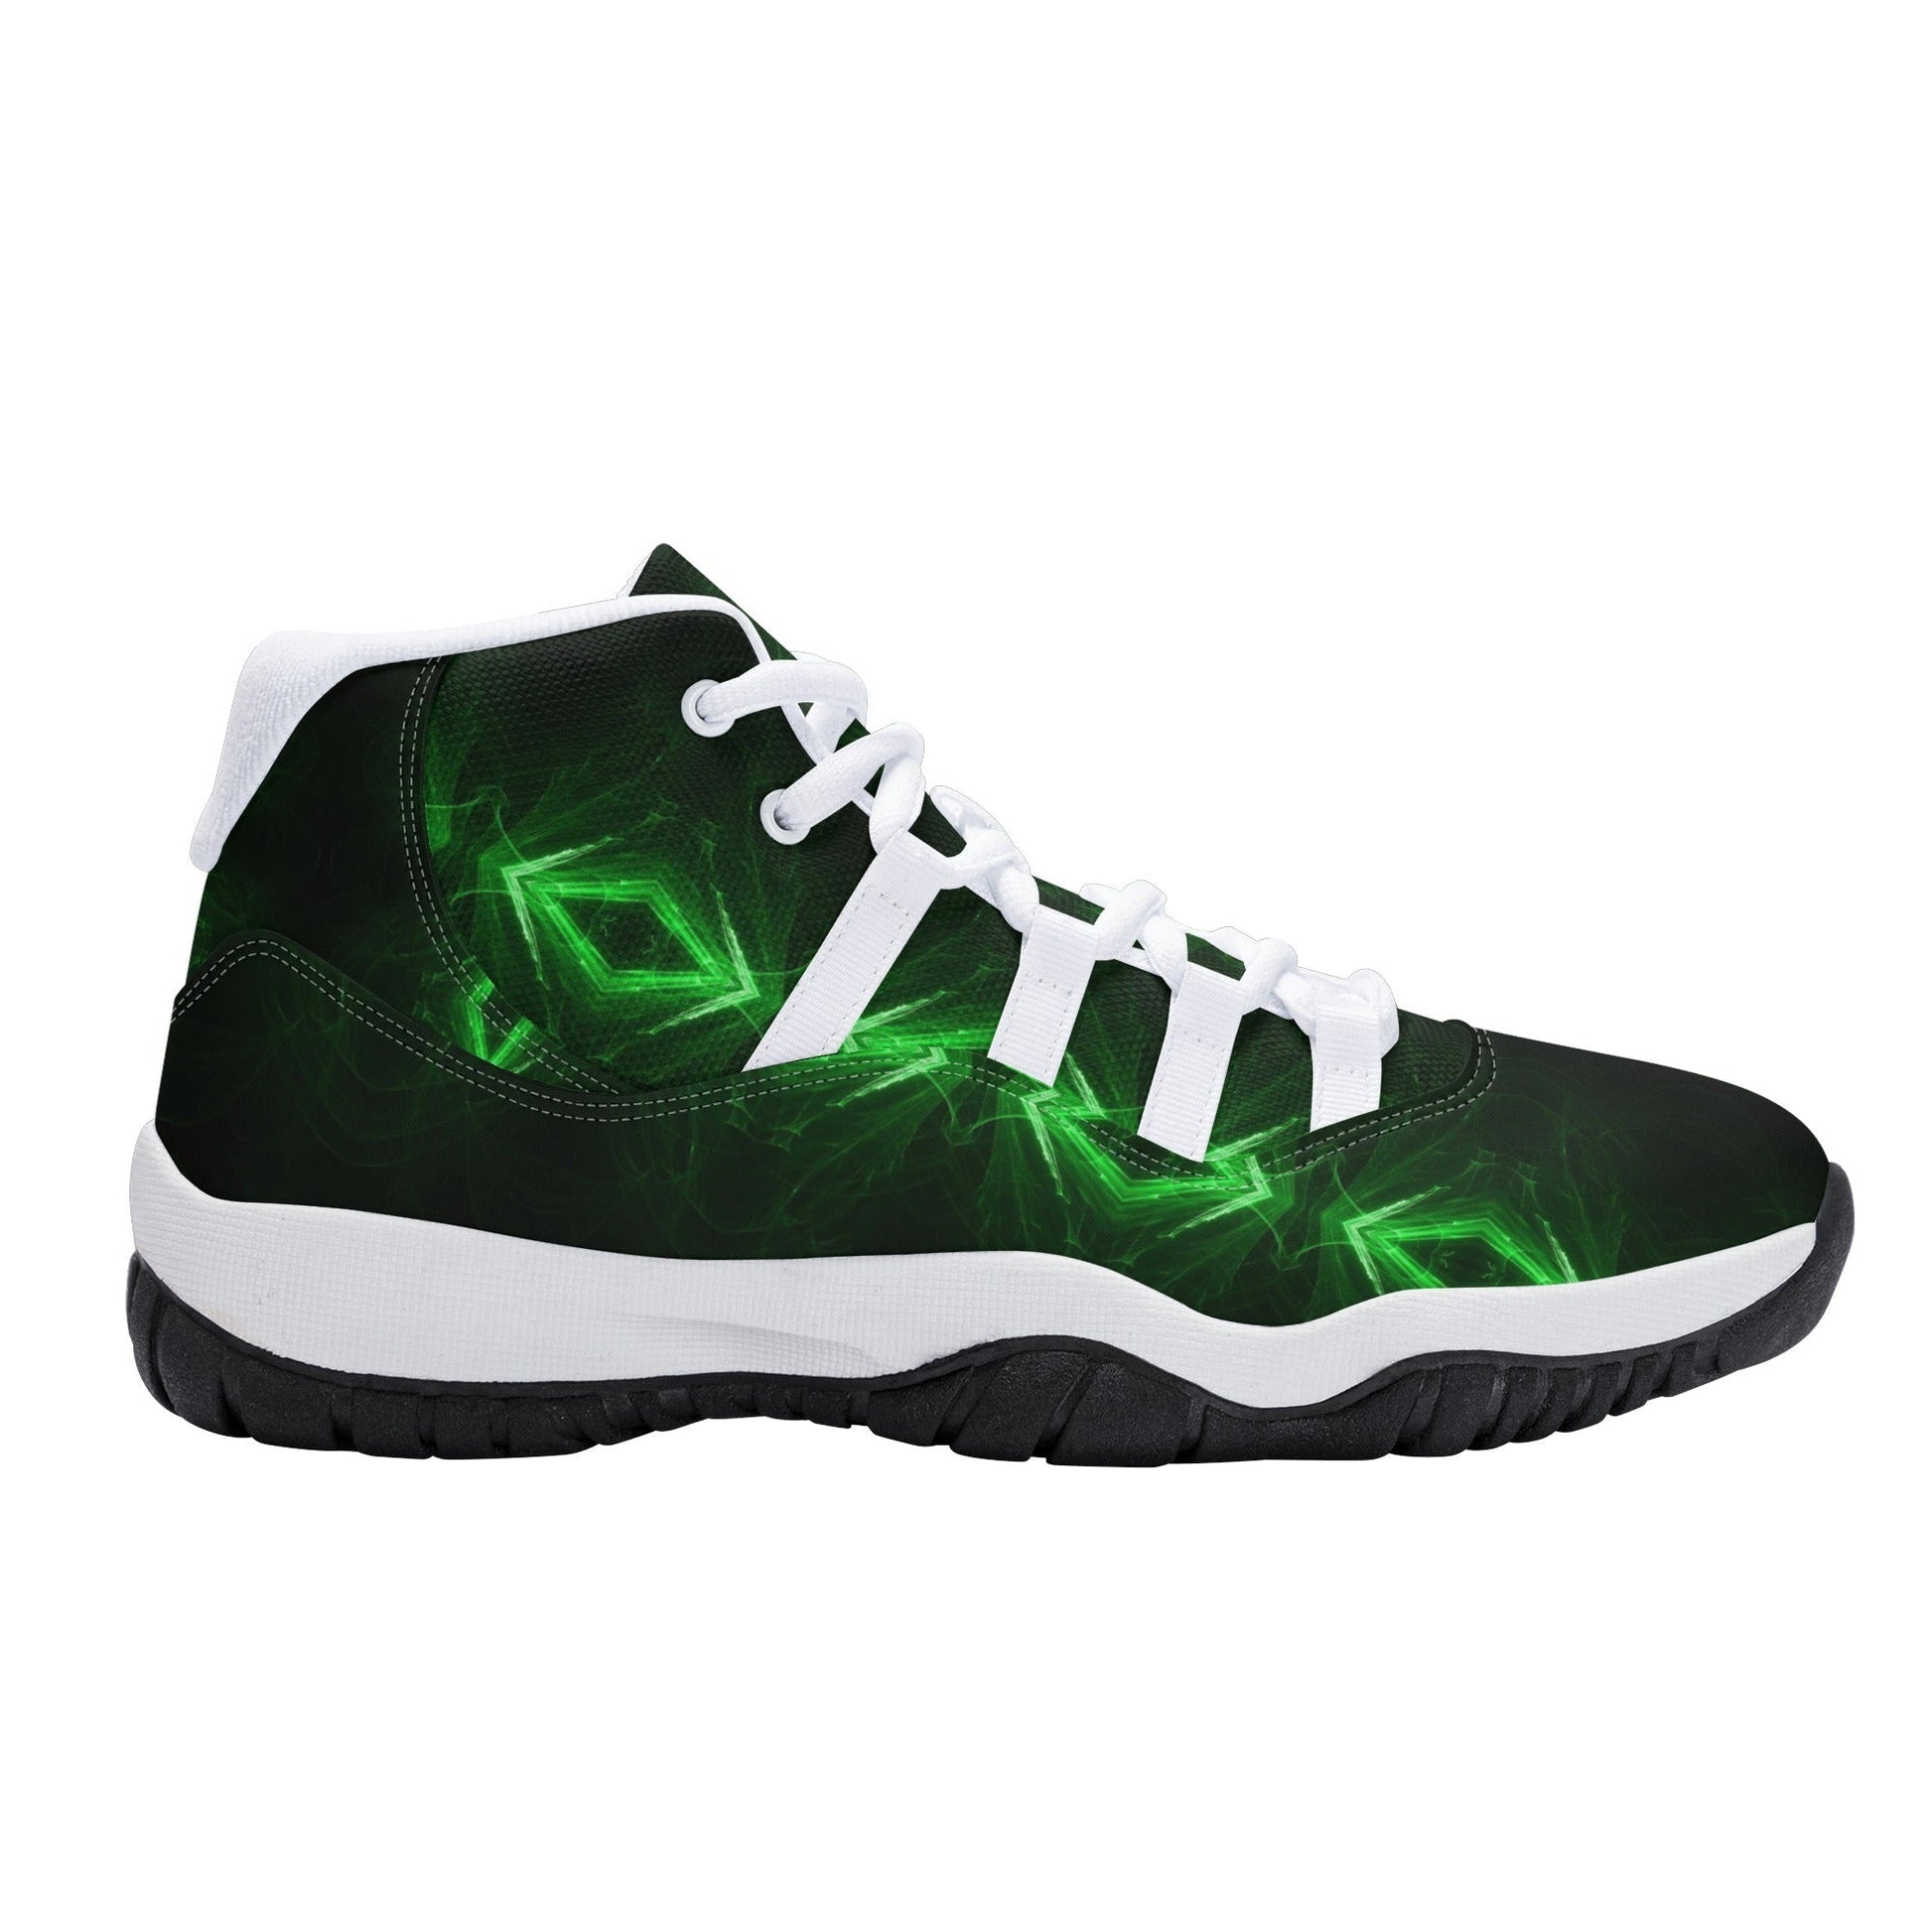 Stand out  with the  Mens High Top Retro Basketball Sneakers  available at Hey Nugget. Grab yours today!